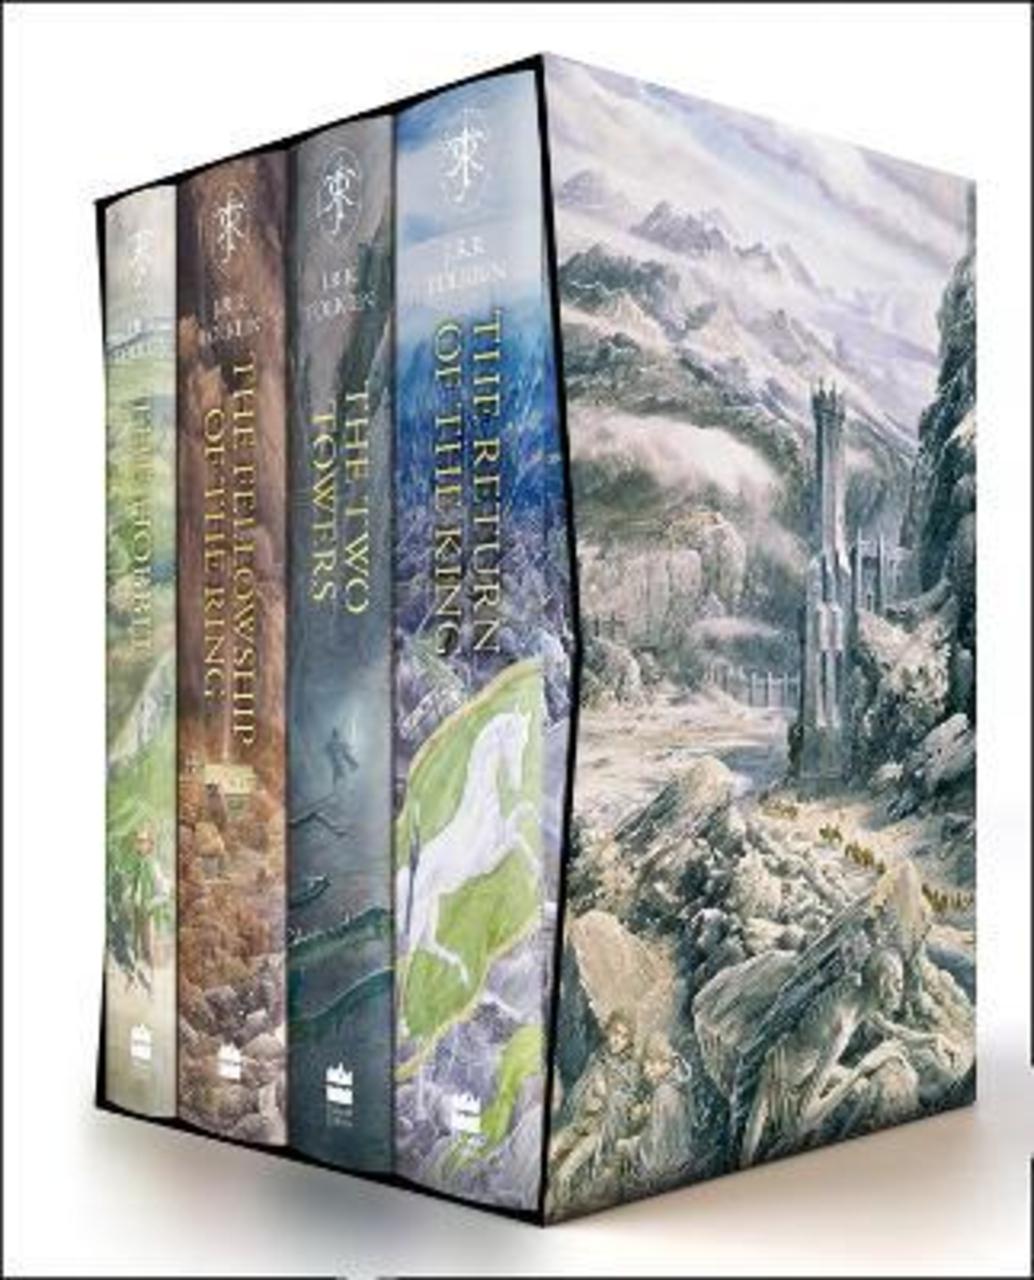 Sách - The Hobbit & The Lord of the Rings Boxed Set by J. R. R. Tolkien (UK edition, hardcover)